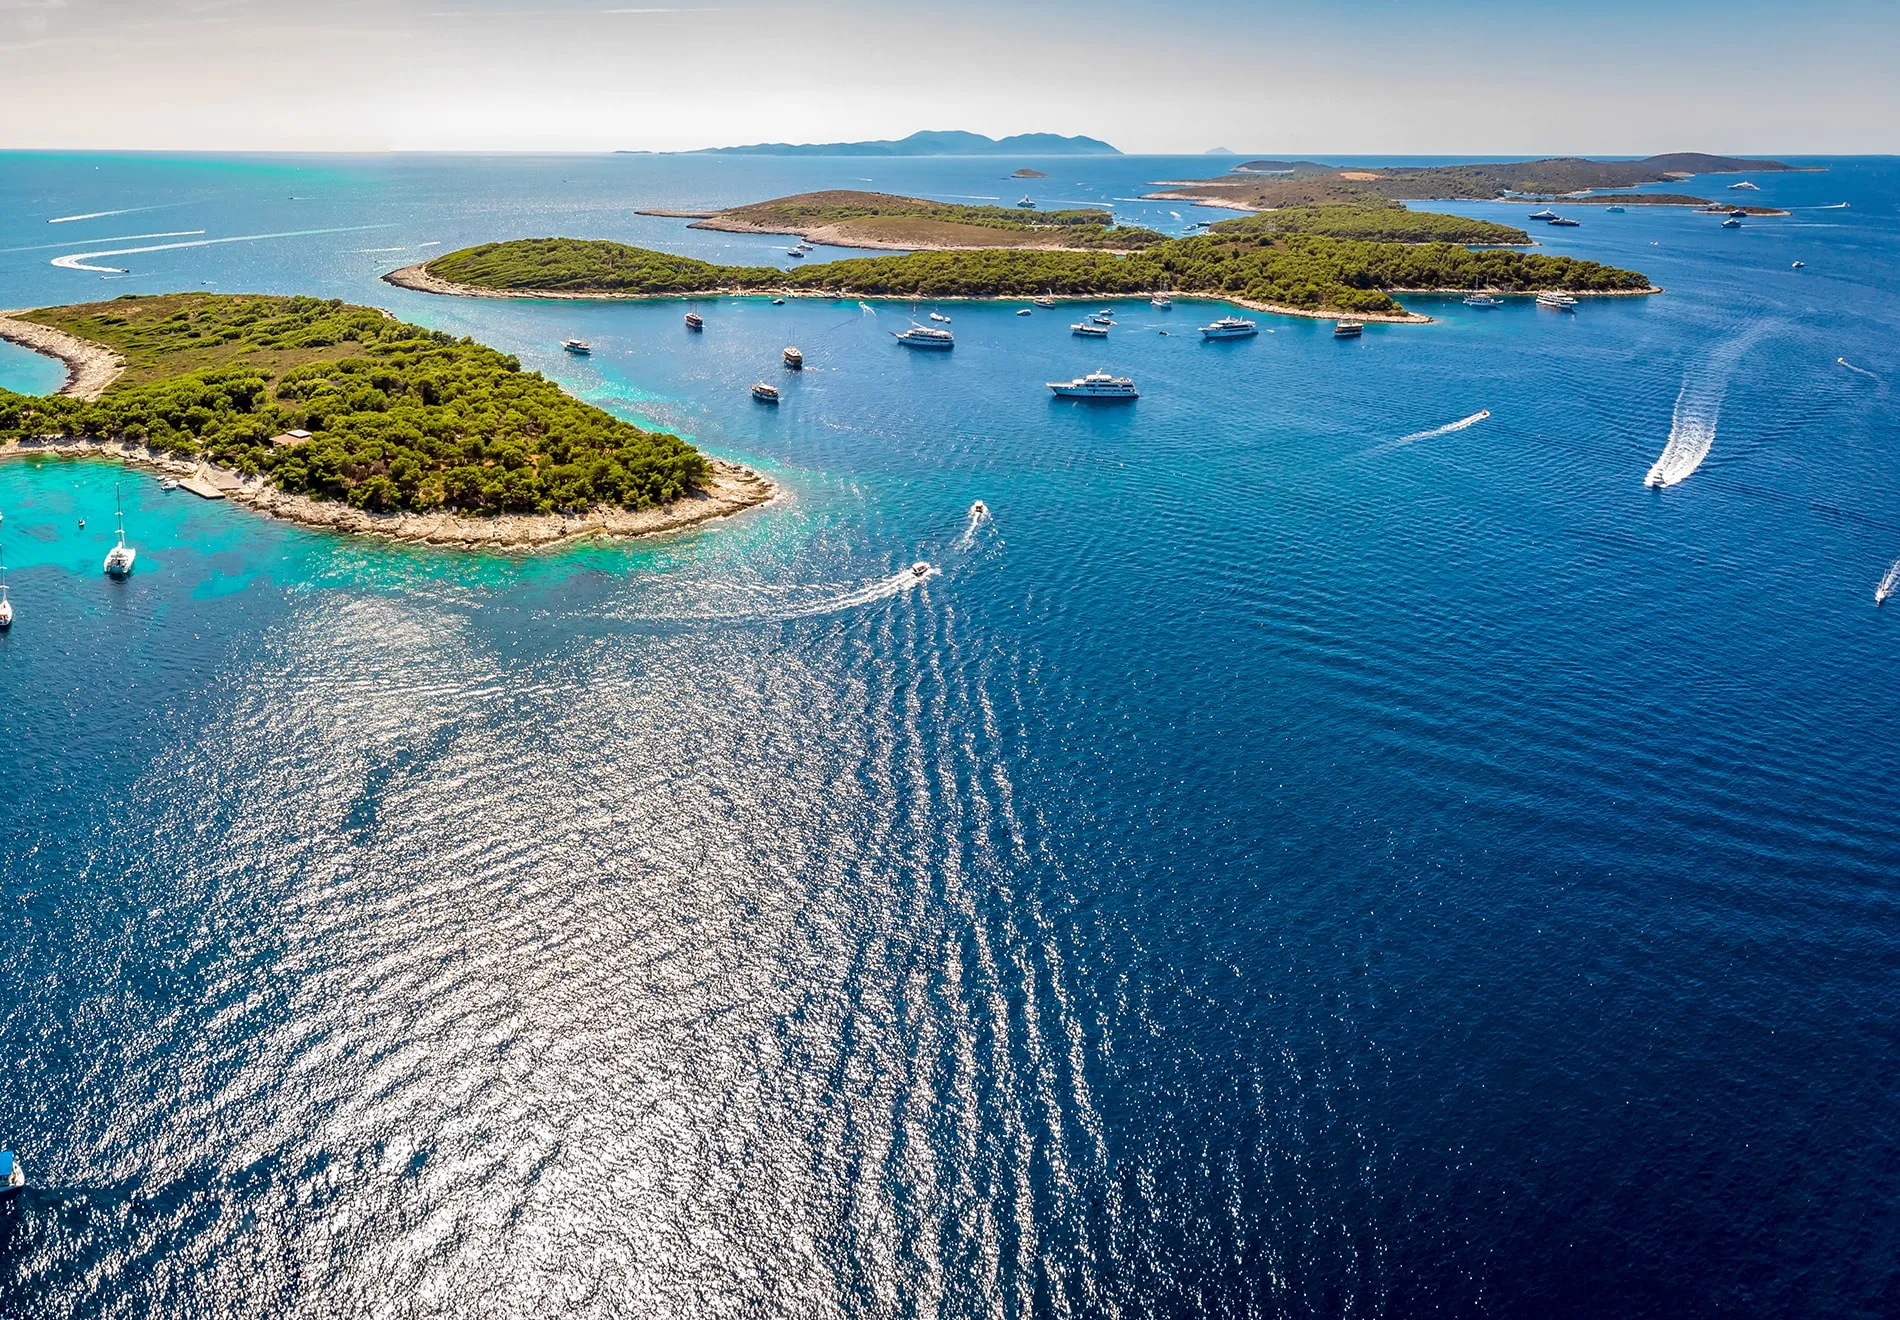 Party enthusiasts shouldn't miss out on the vibrant scenes of Hvar and the Pakleni Islands